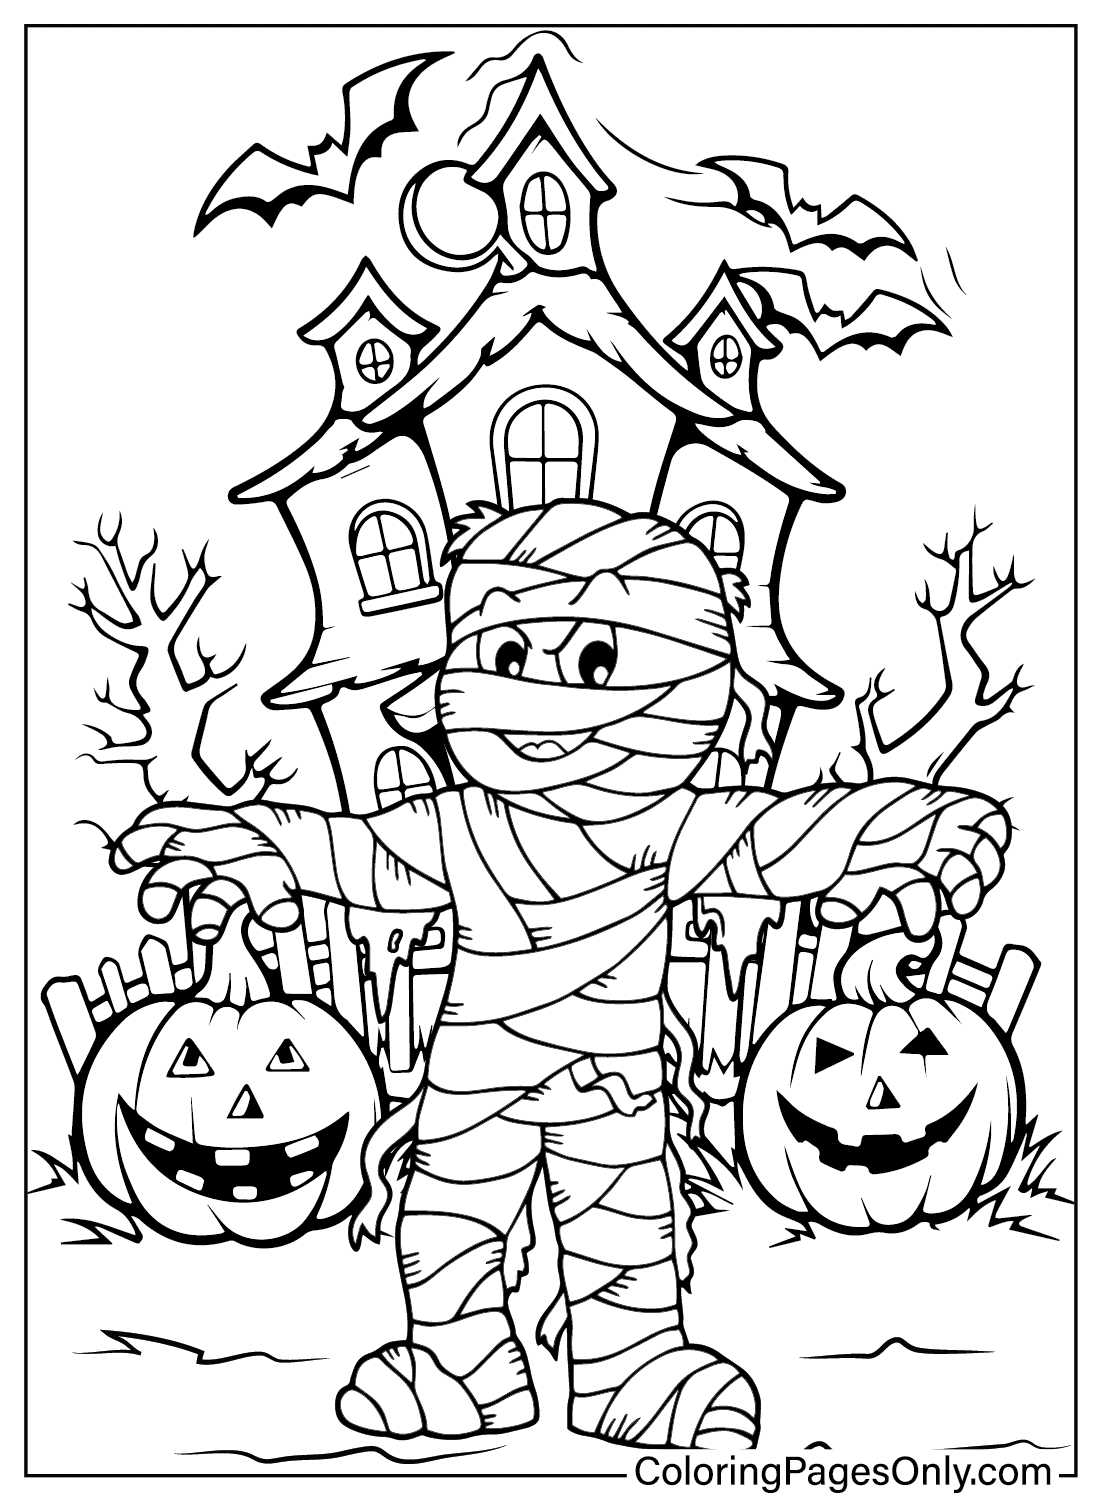 Mummy Coloring Page from Mummy